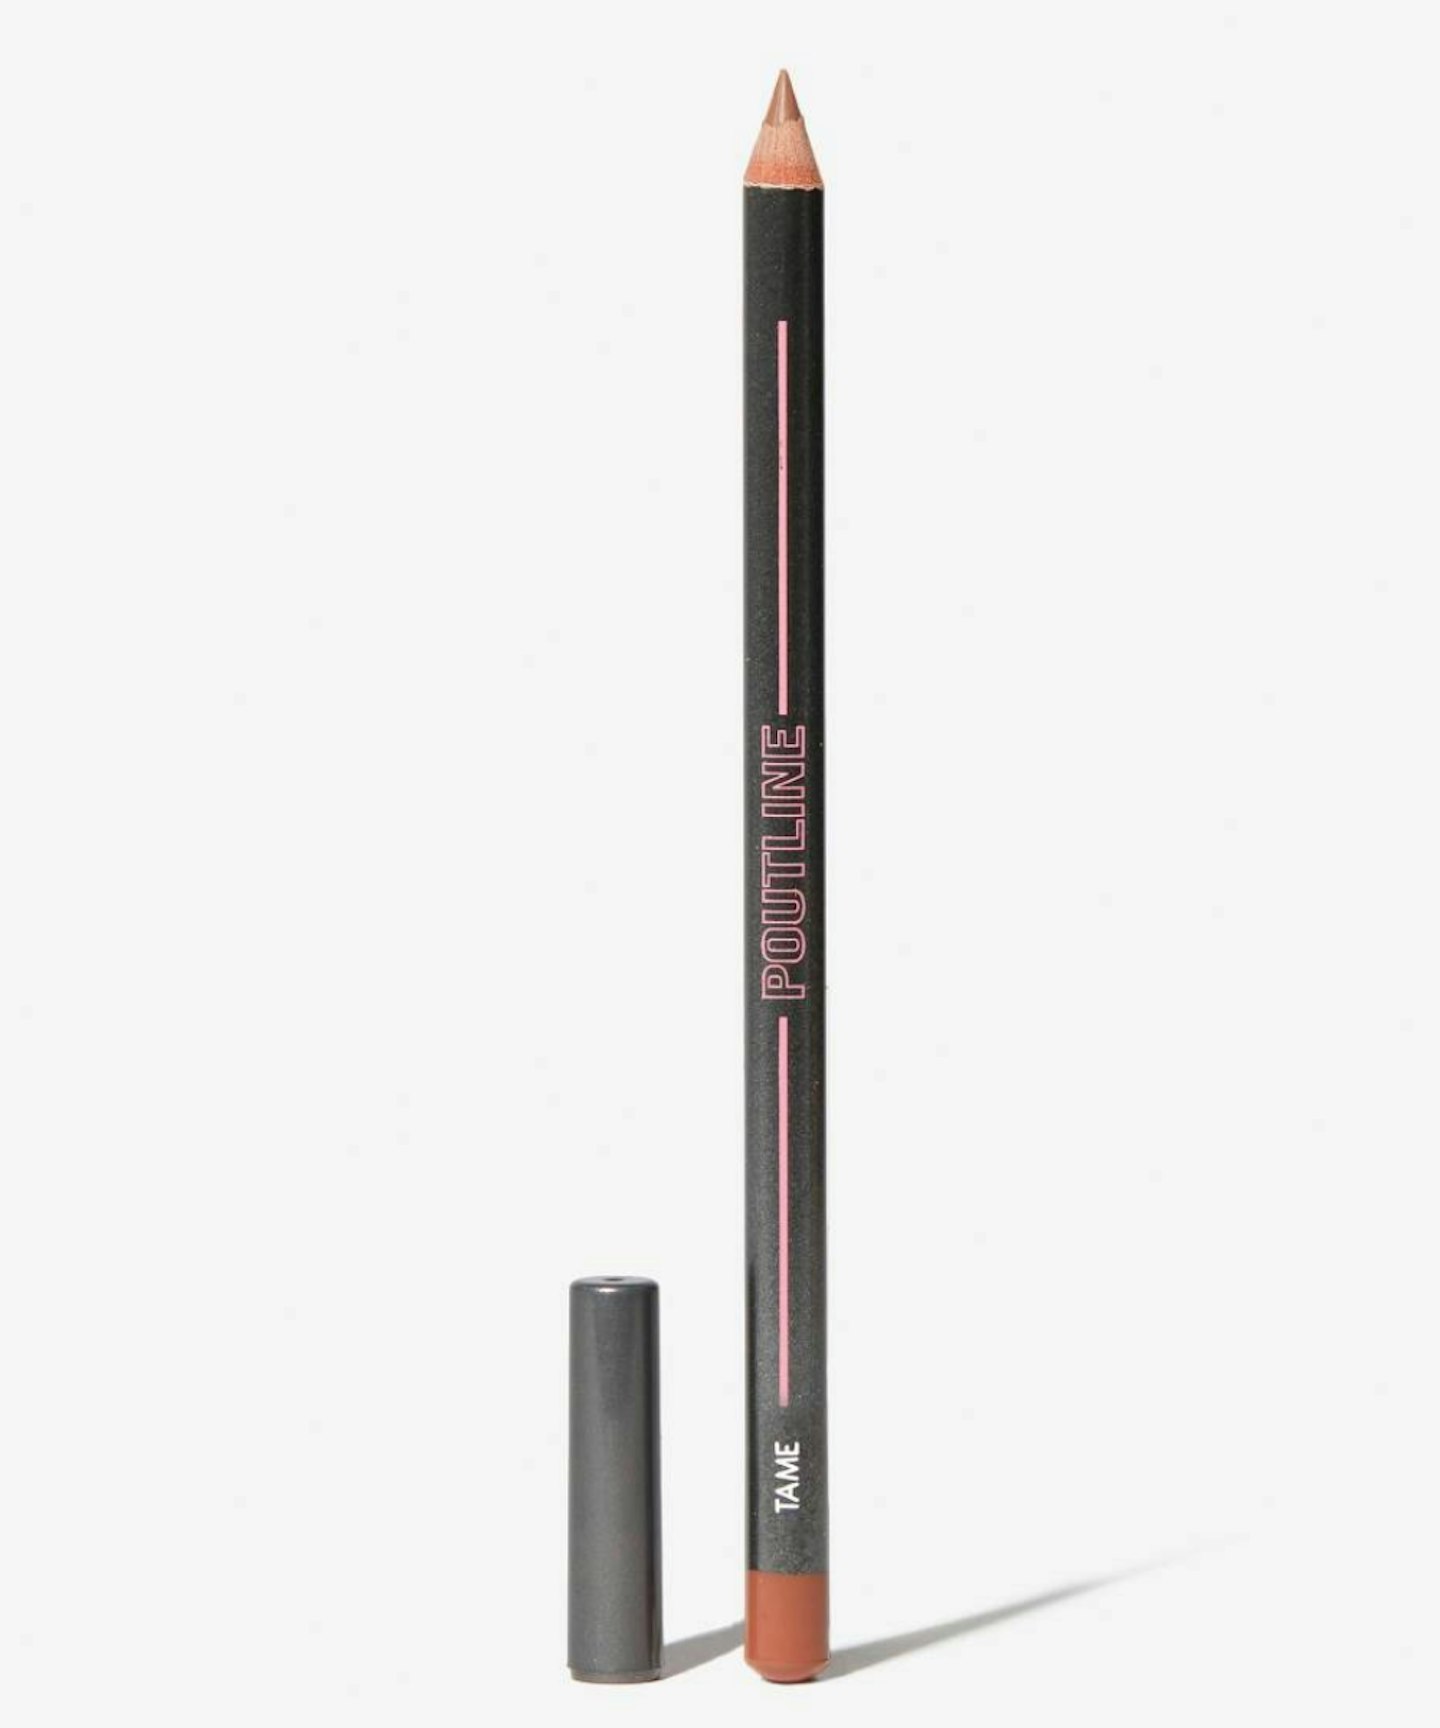  bPerfect Pout Lip Liner in Tame